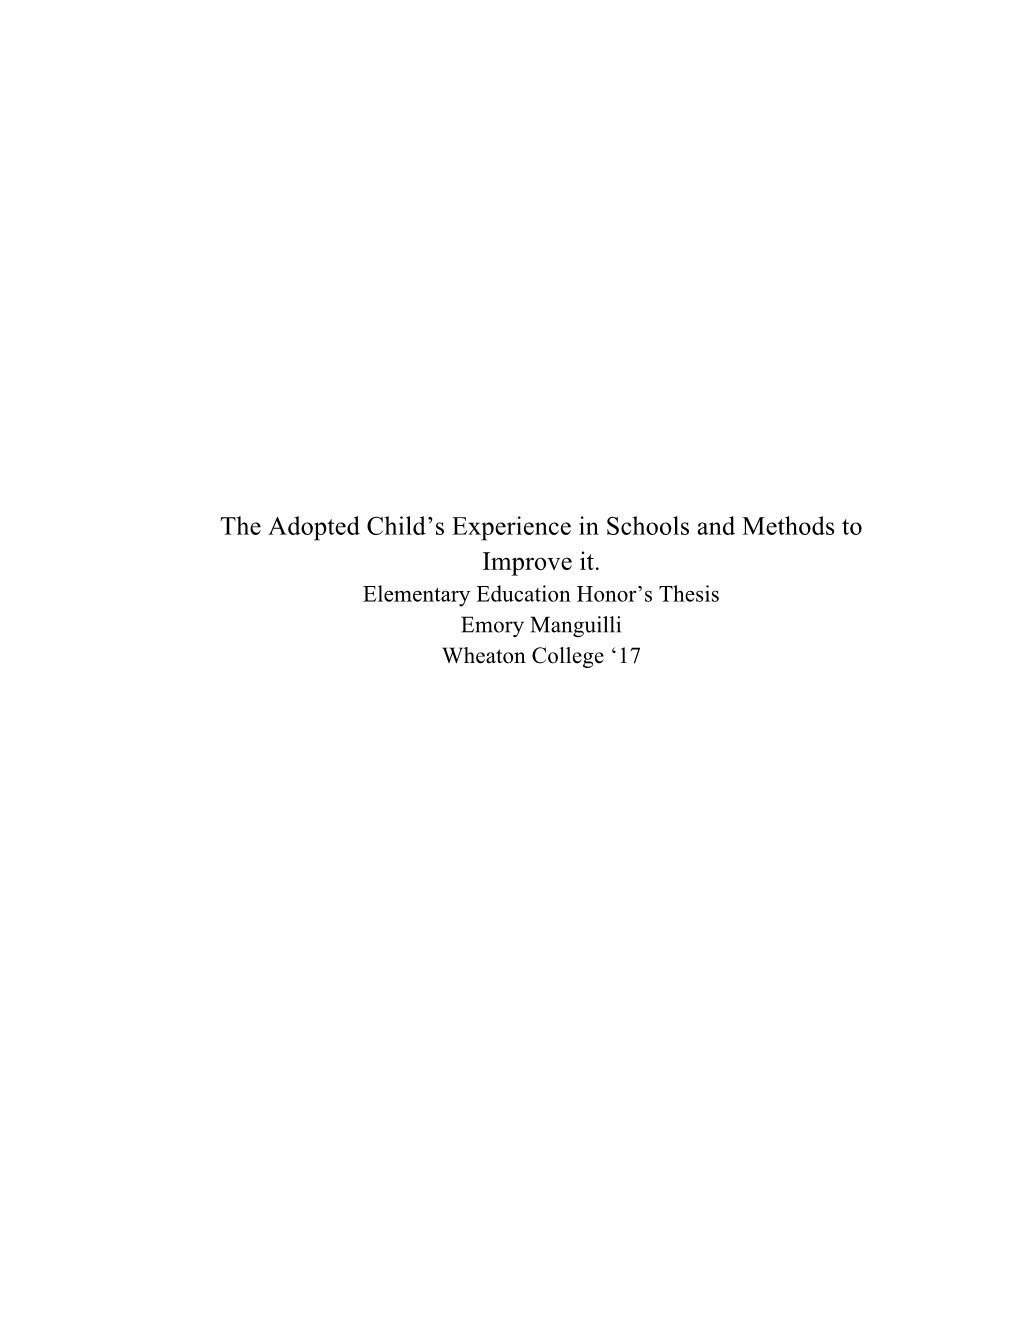 The Adopted Child's Experience in Schools and Methods to Improve